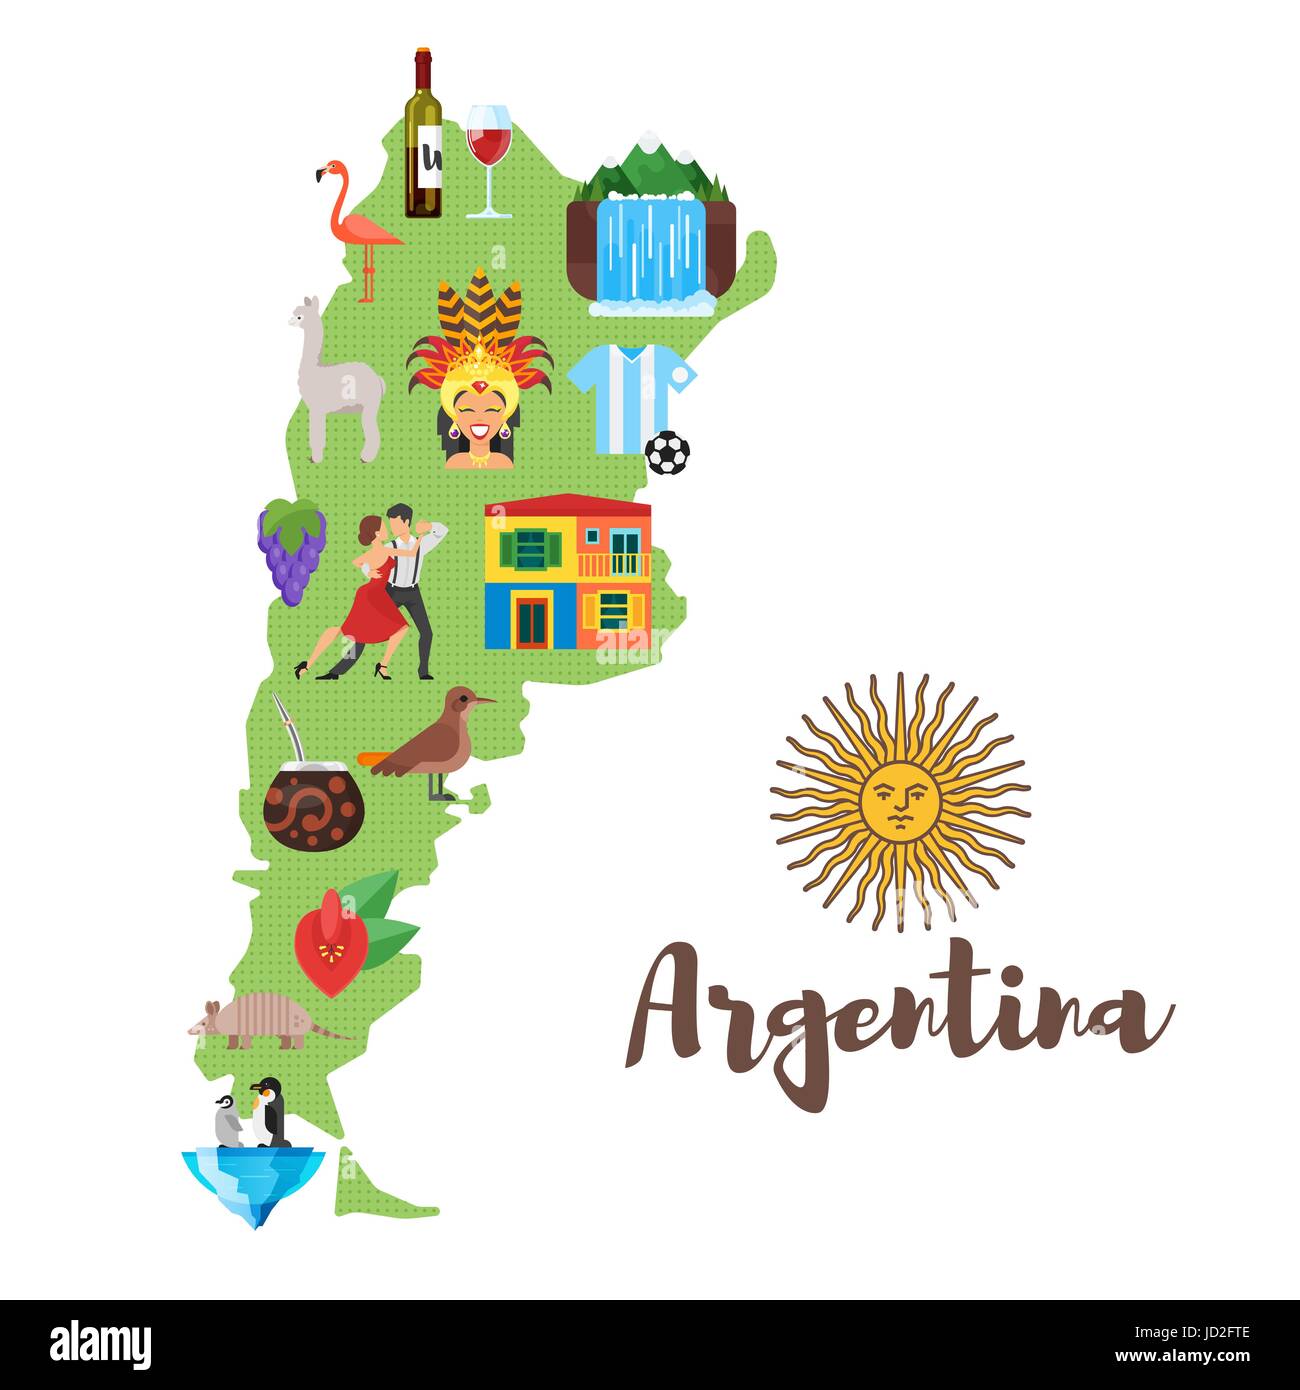 Vector flat style illustration of Argentina map with Argentinian national cultural symbols. Isolated on white background. Stock Vector